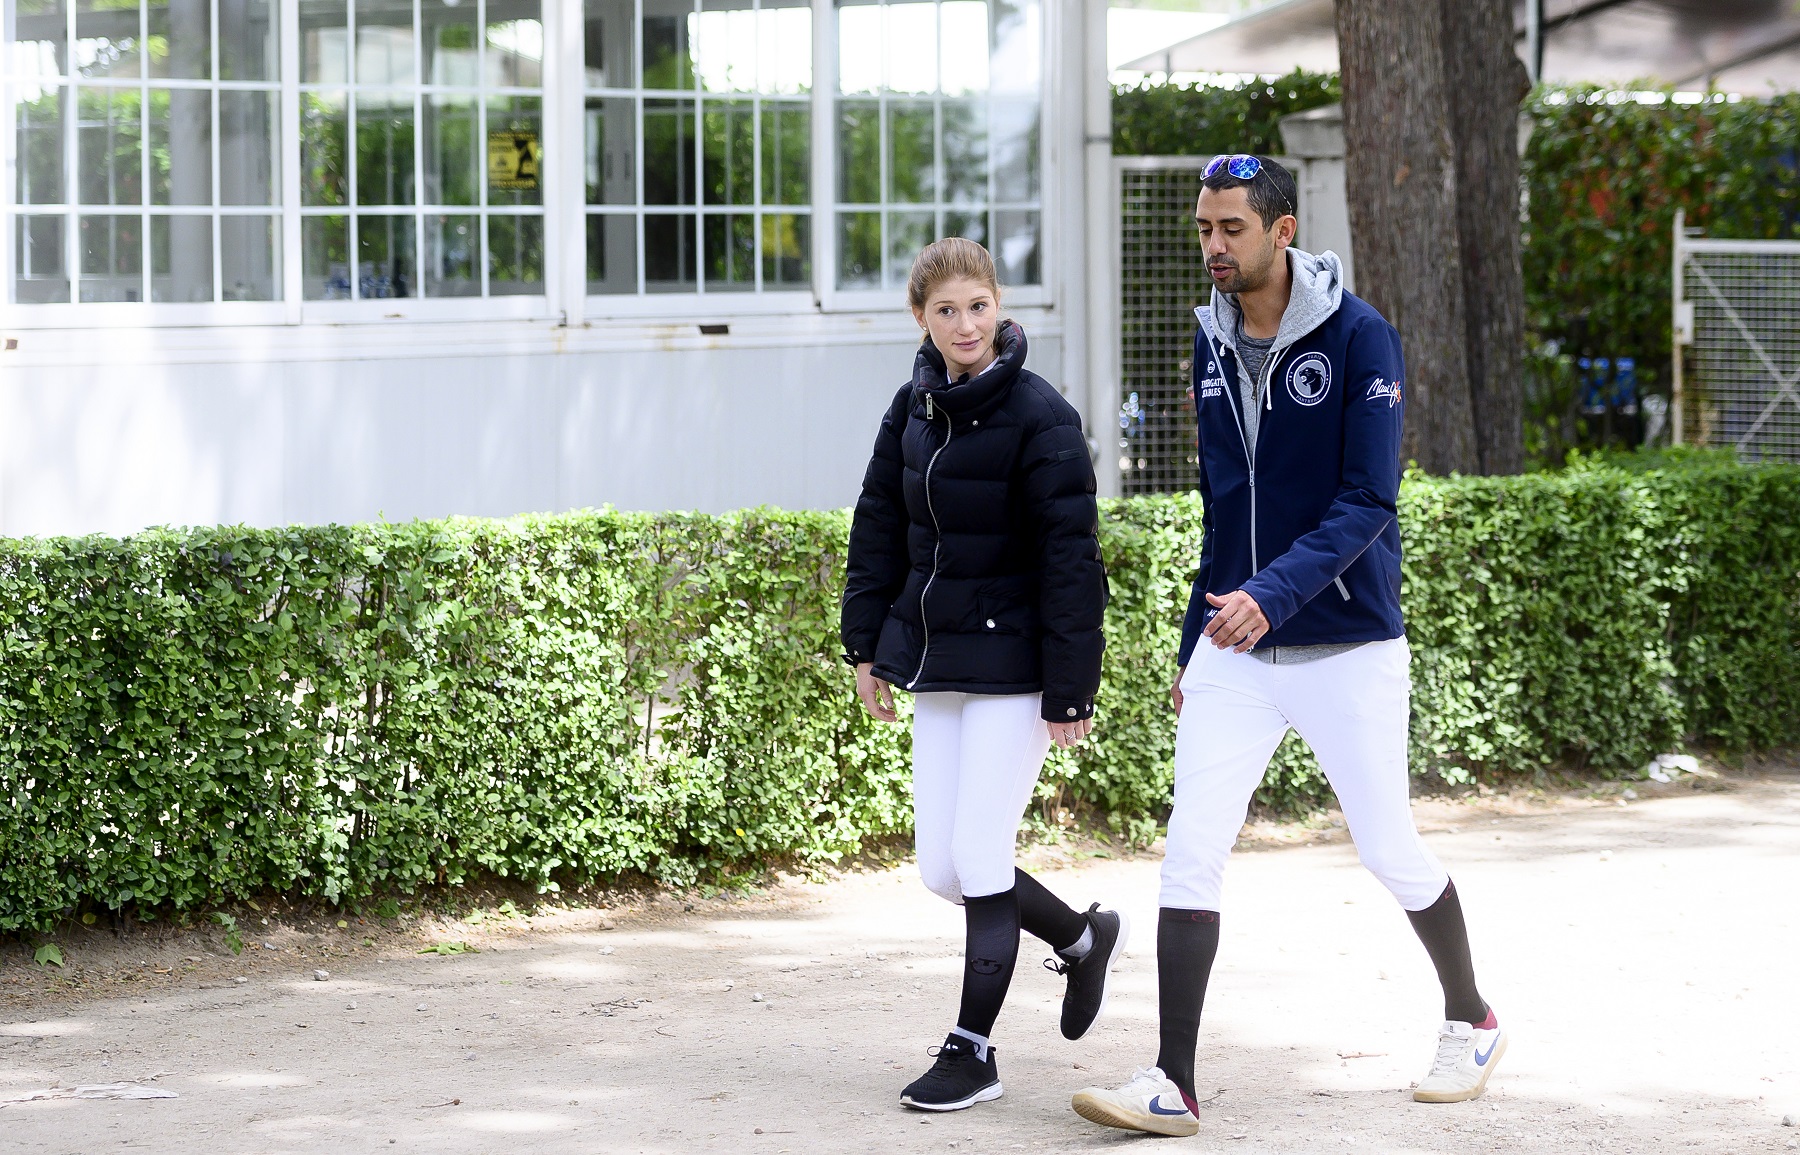 MADRID, SPAIN - MAY 17: Jennifer Gates and Nayel Nassar during Madrid-Longines Champions, the International Global Champions Tour at Club de Campo Villa de Madrid on May 17, 2019 in Madrid, Spain. (Photo by Samuel de Roman/Getty Images)